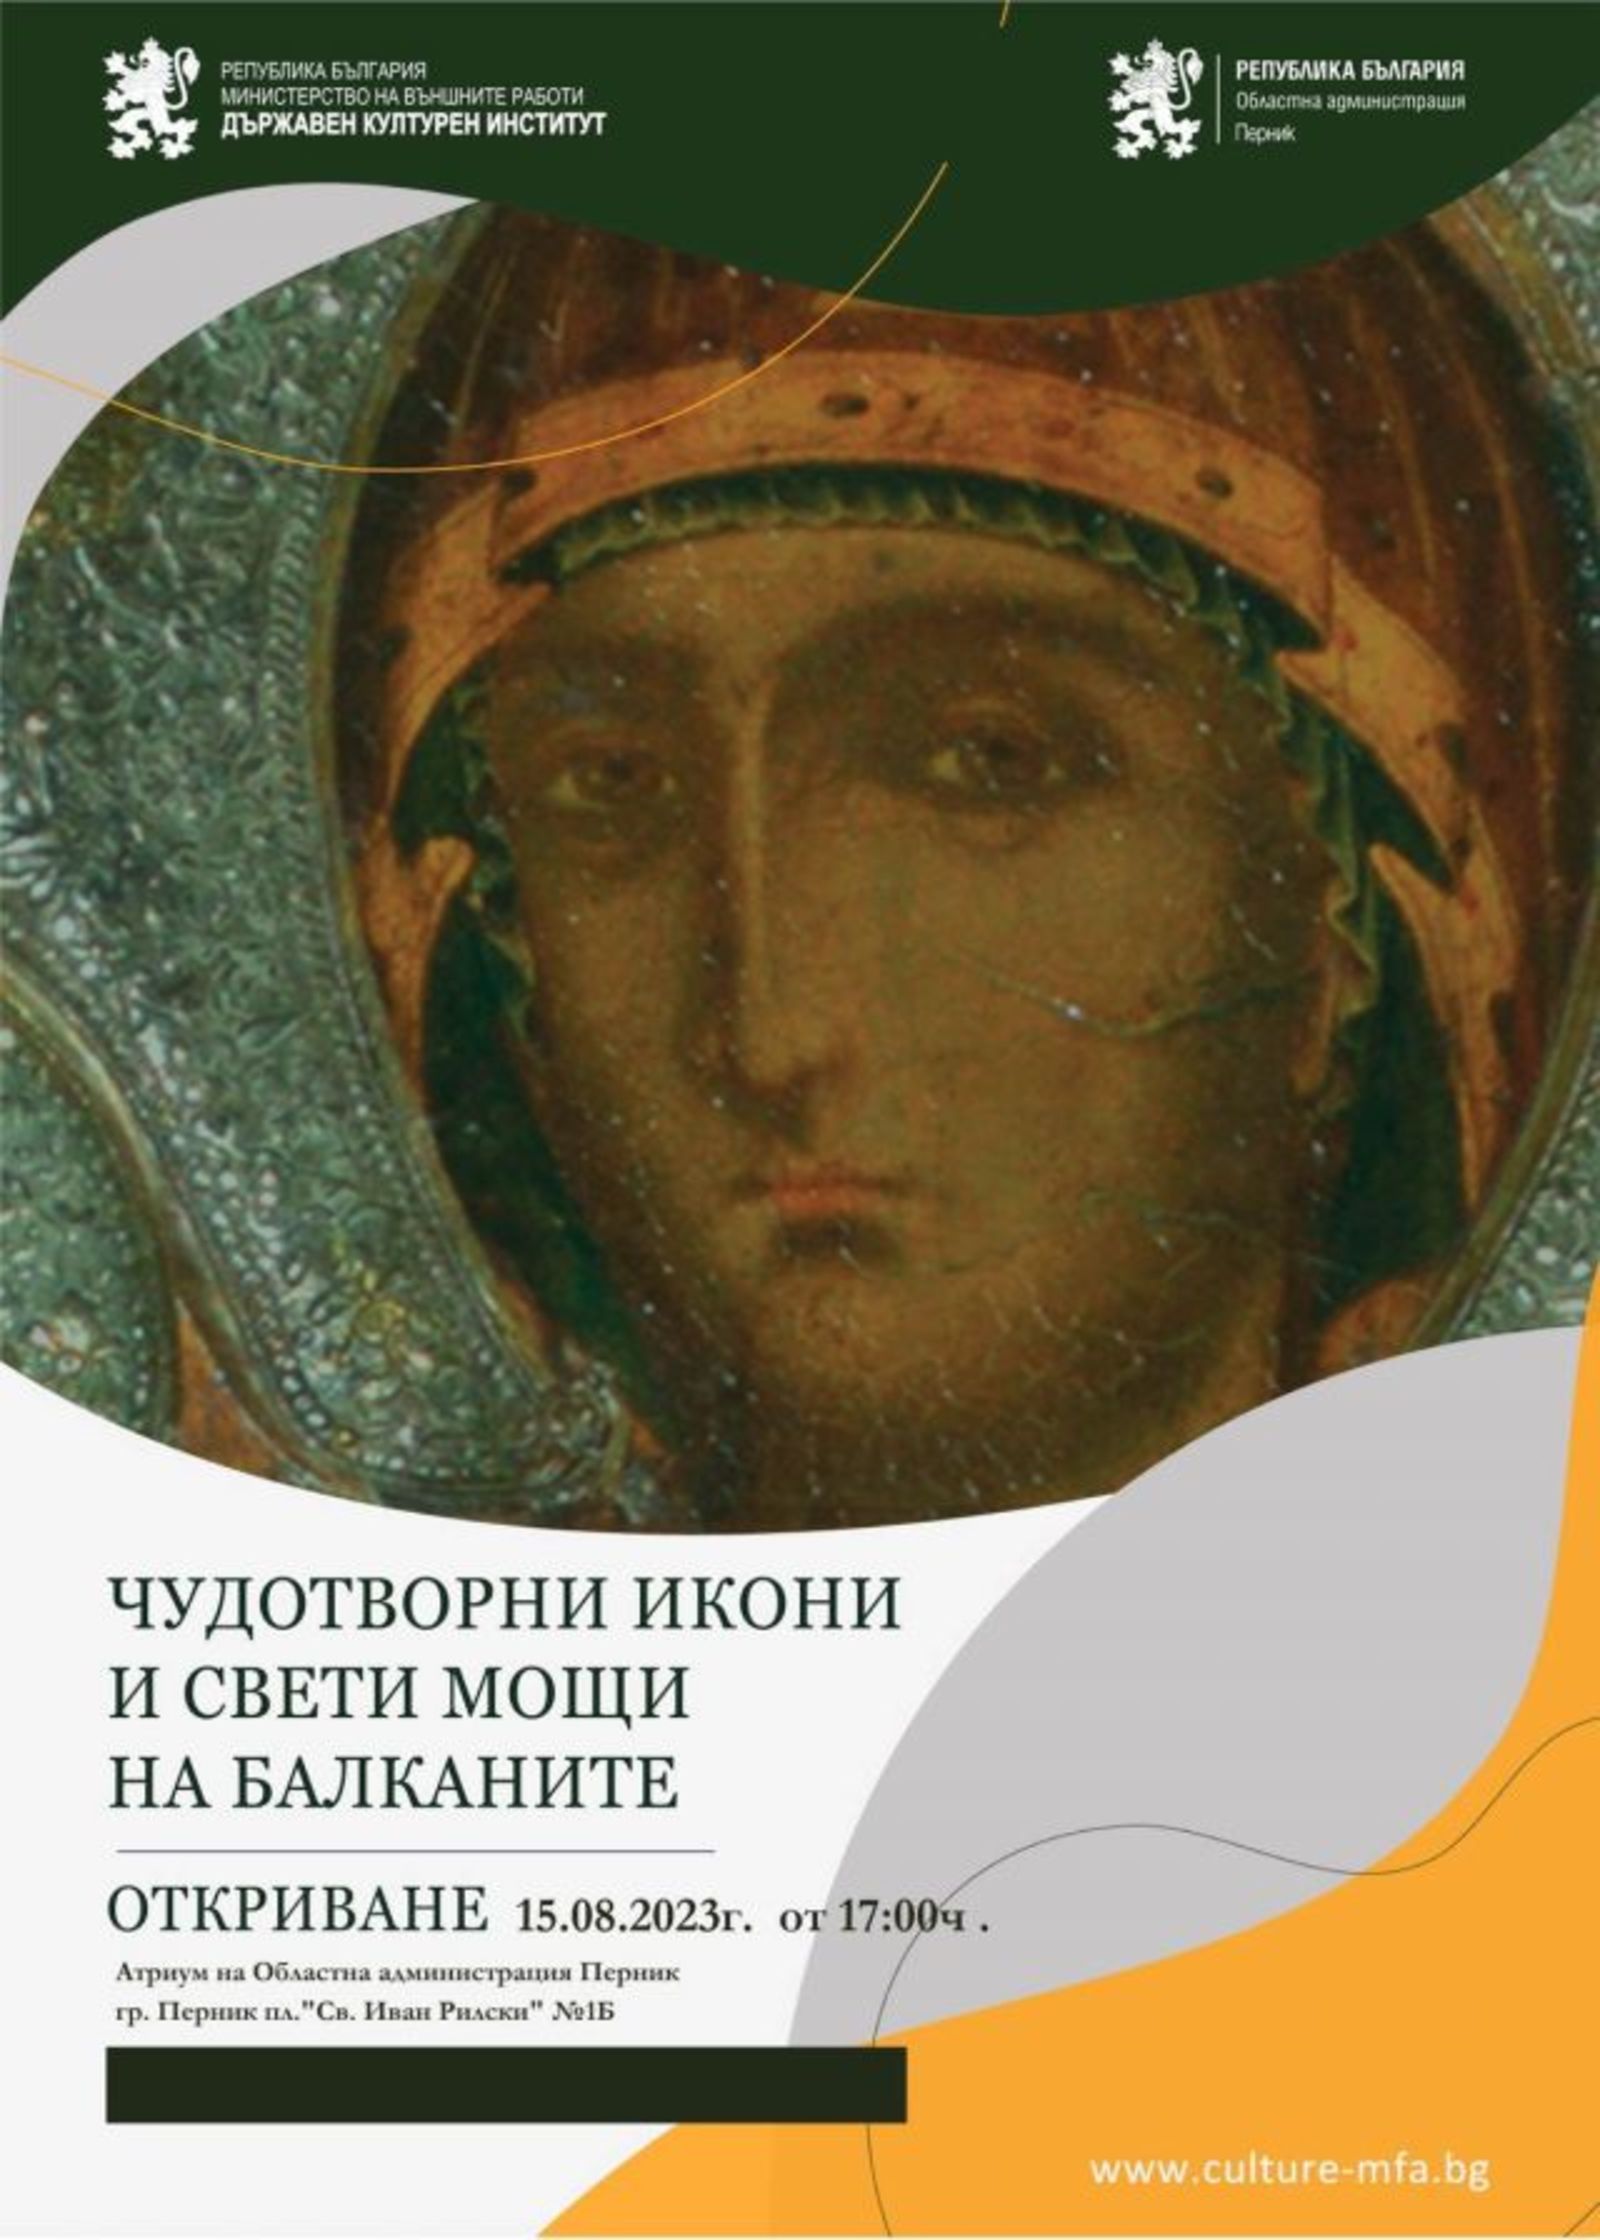 Opening of the Exhibition "Miraculous Icons and Holy Relics of the Balkans" in Pernik